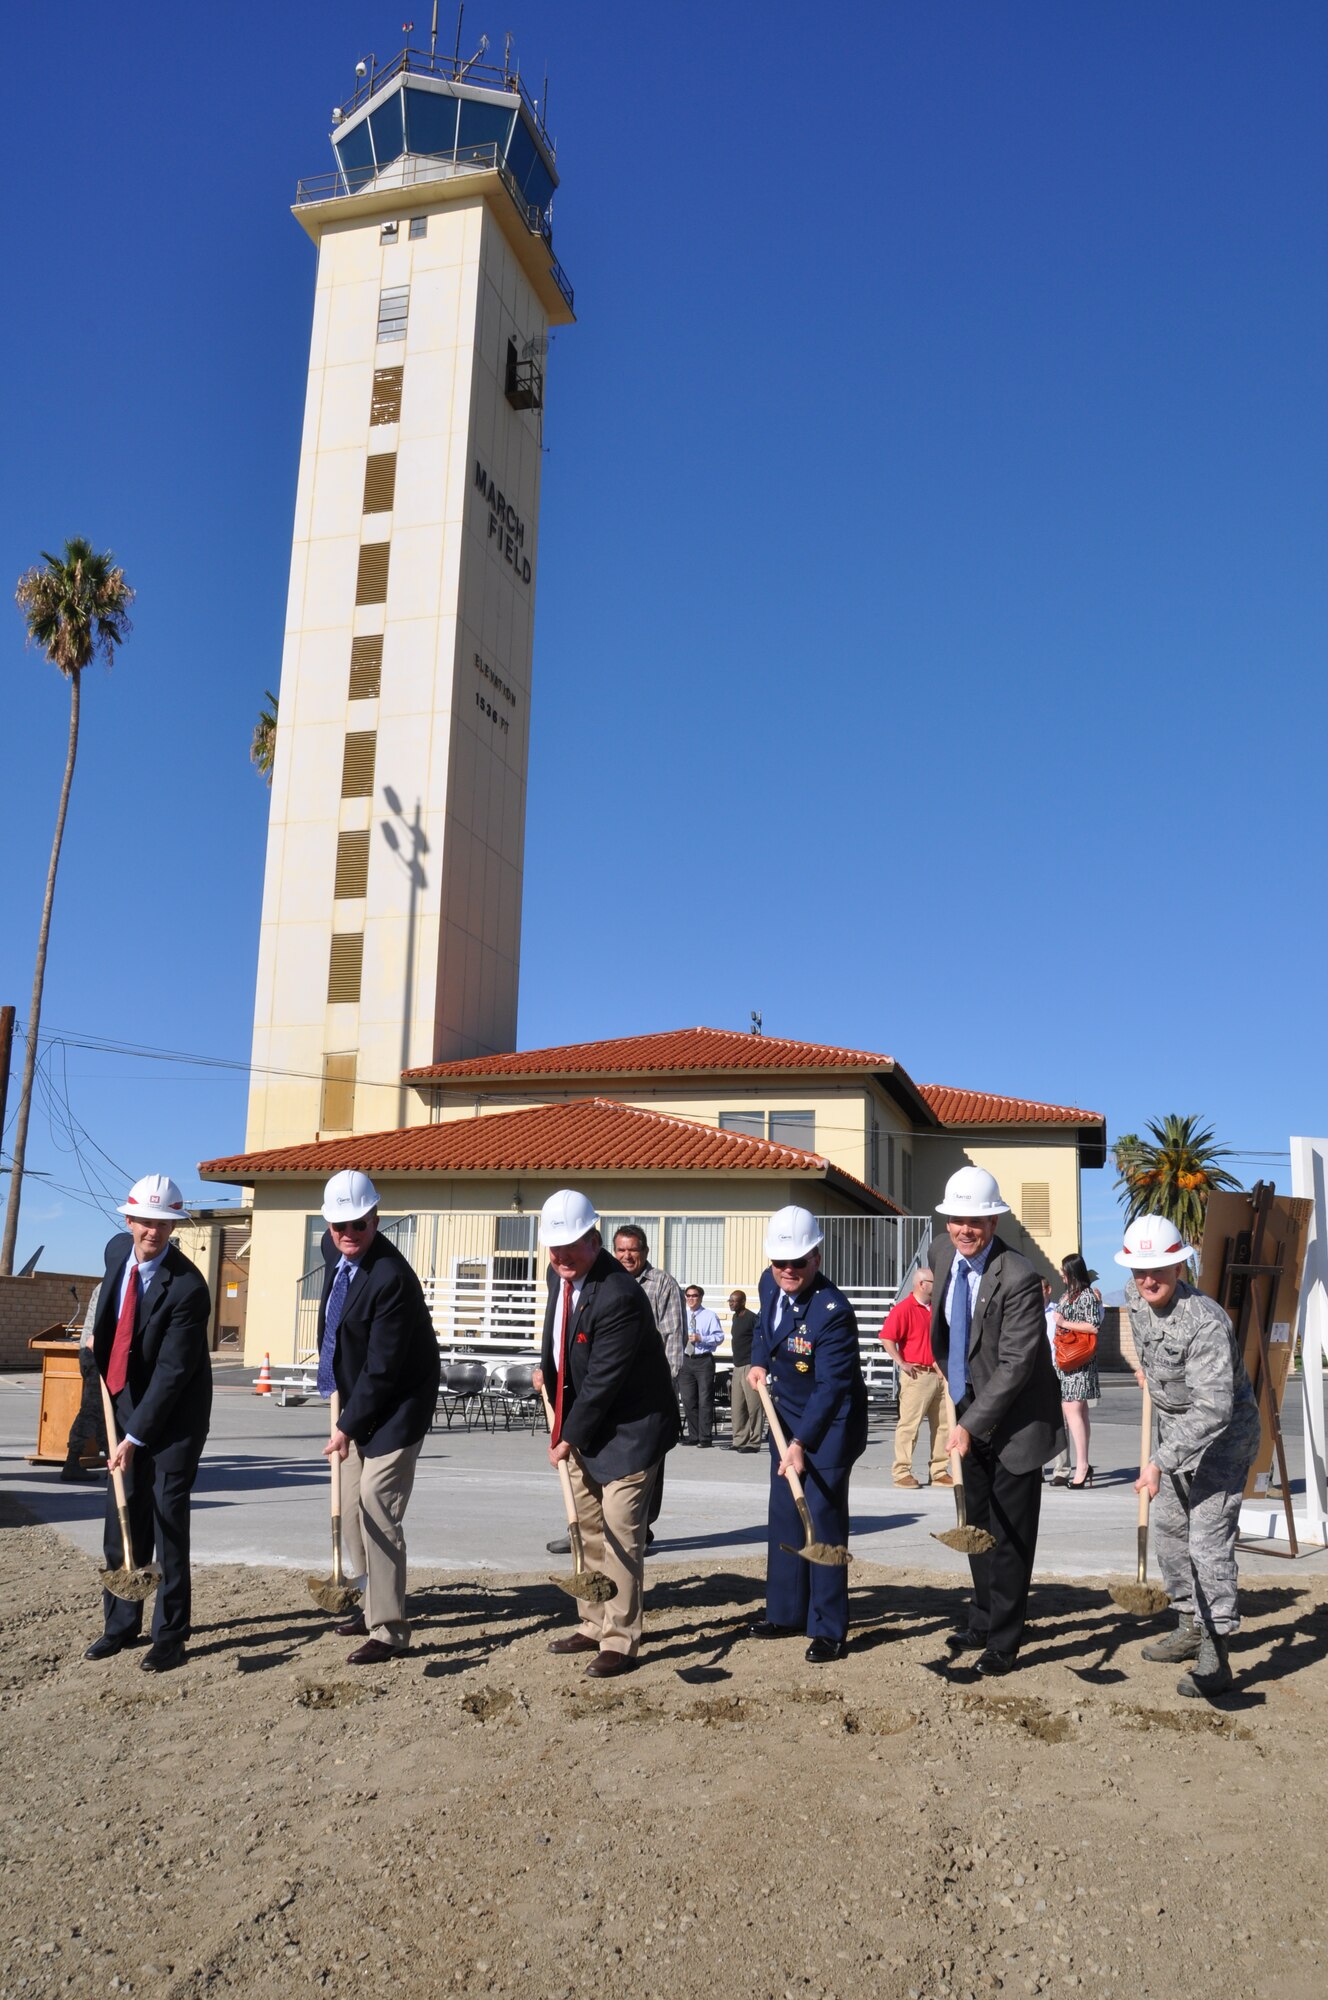 The U.S. Army Corps of Engineers, Los Angeles District joined community leaders in December to break ground for the new March Air Reserve Base's nearly 16,000 sq. foot airfield traffic control tower and base operations facility. (U.S. Air Force photo by SSgt Carrie Peasinger)

